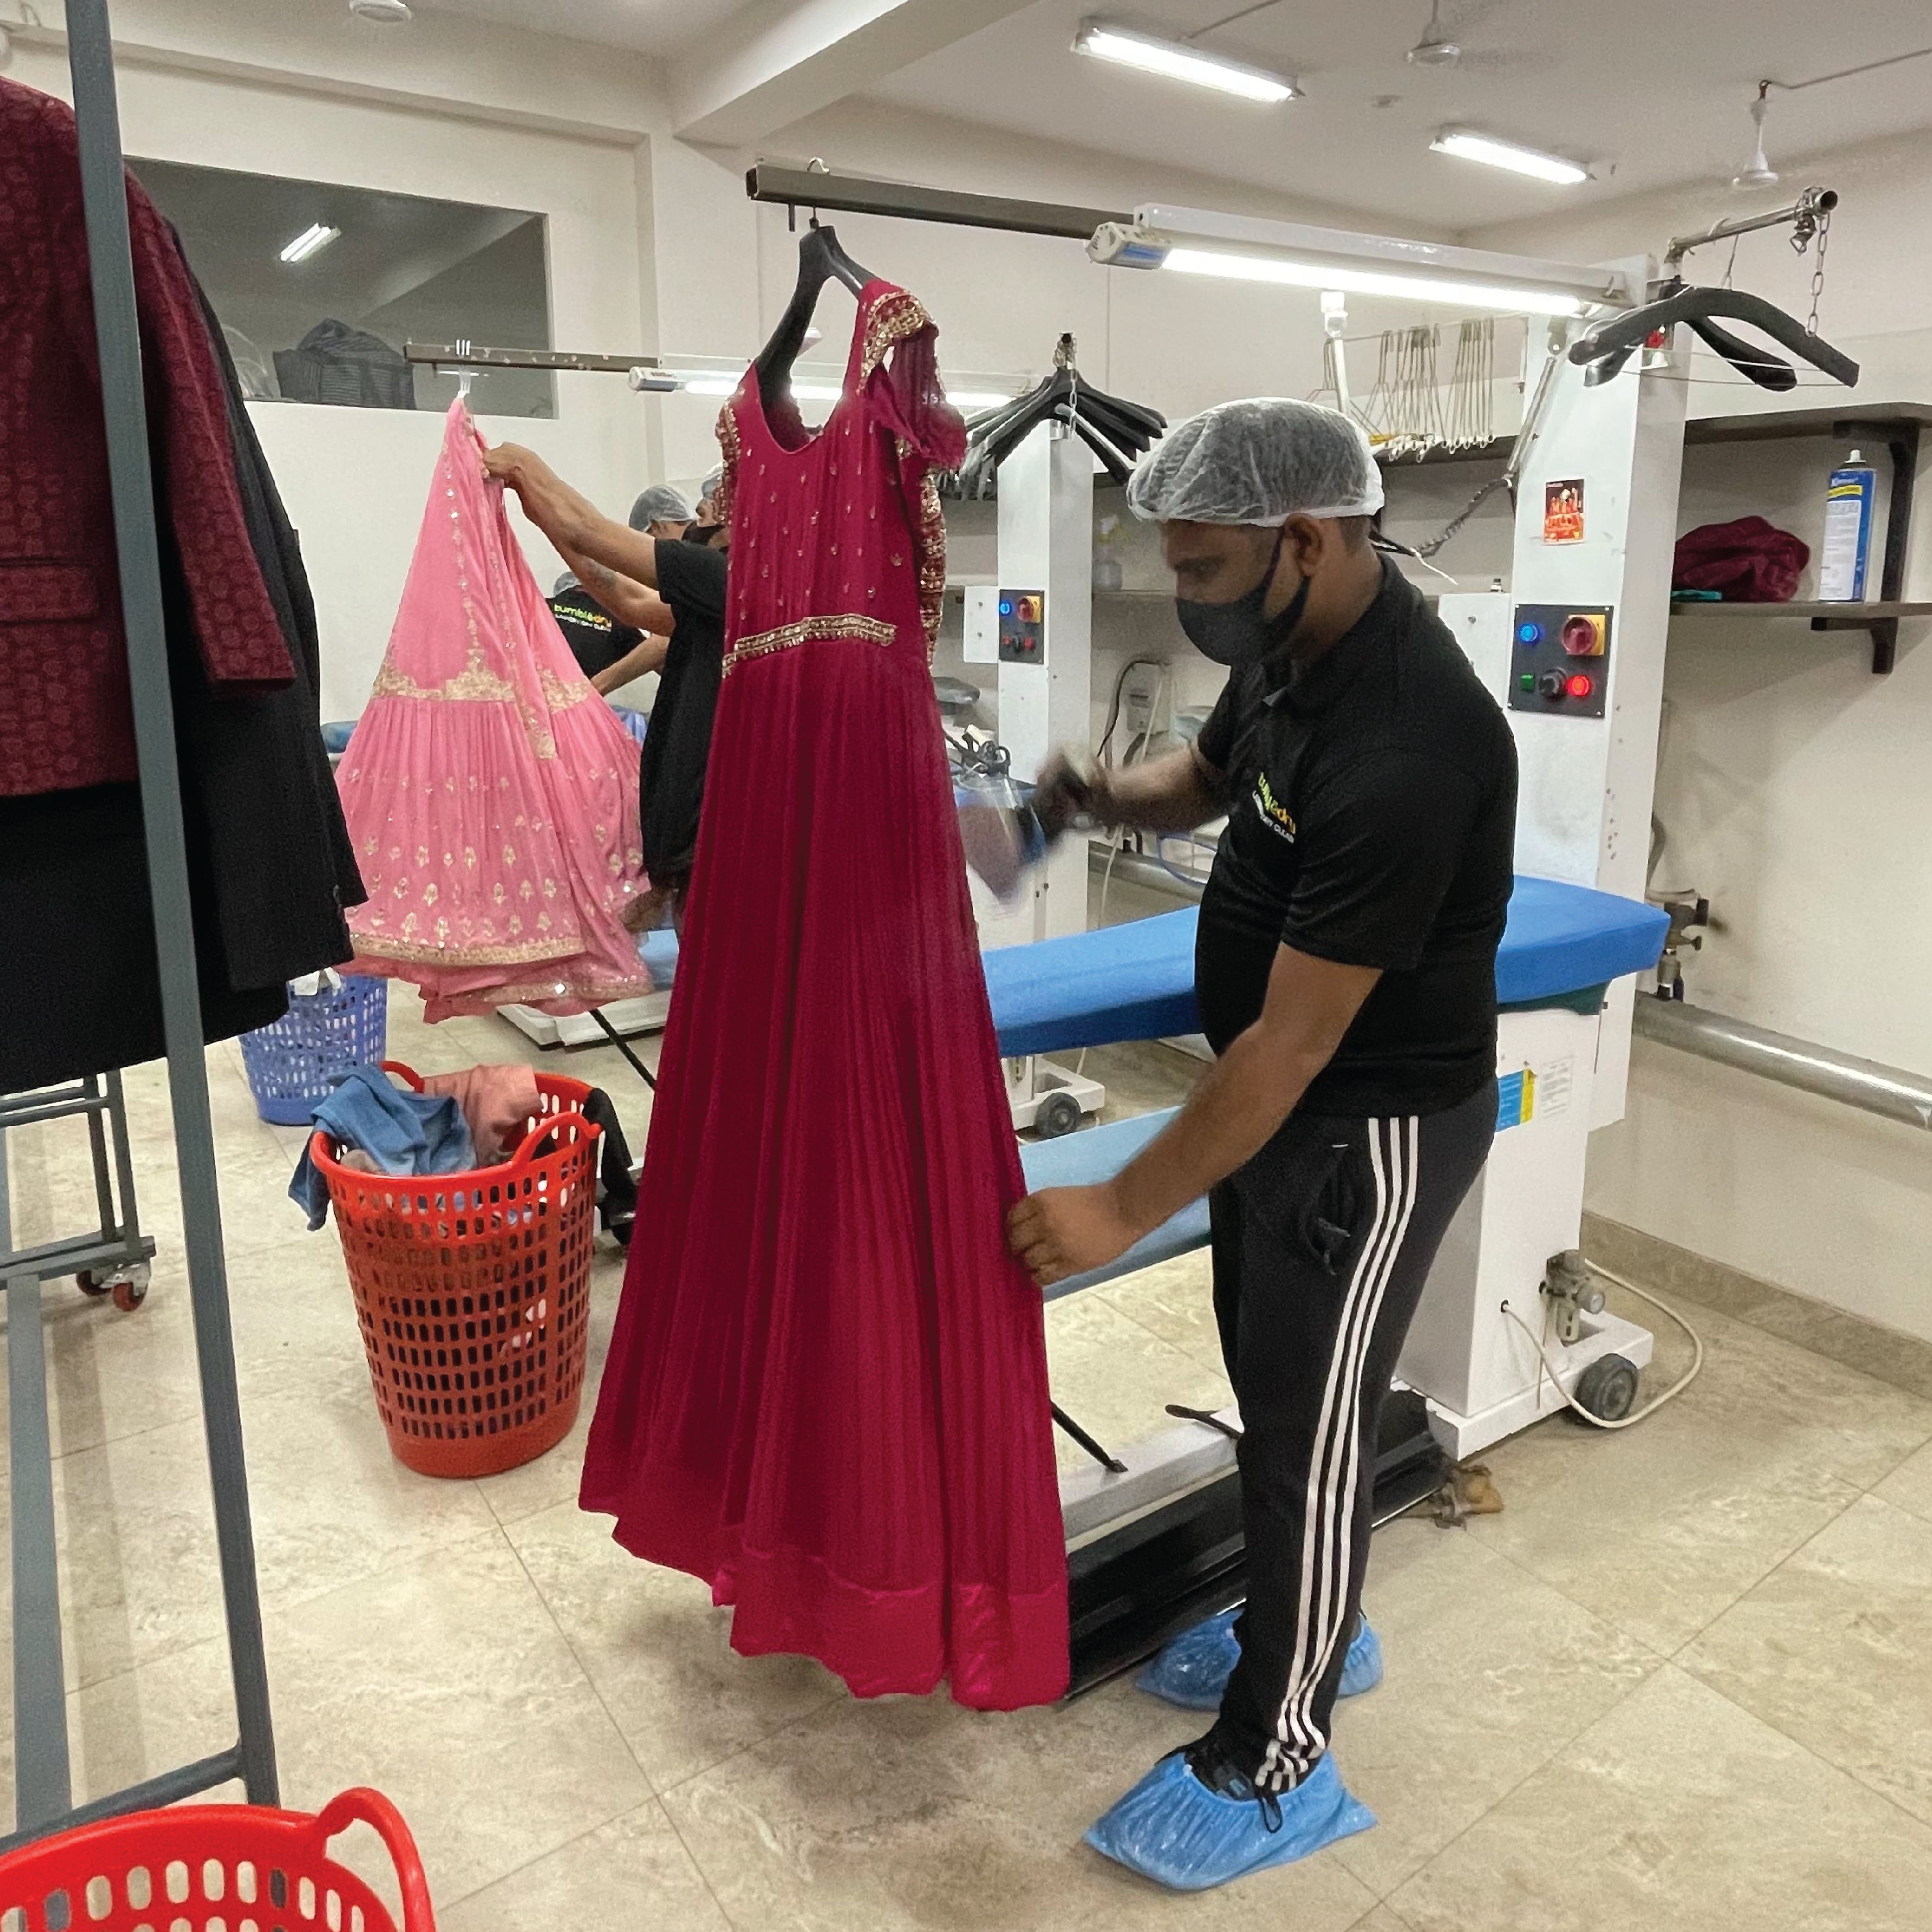 Tumbledry - Best Laundry & Dry Cleaning Services in India